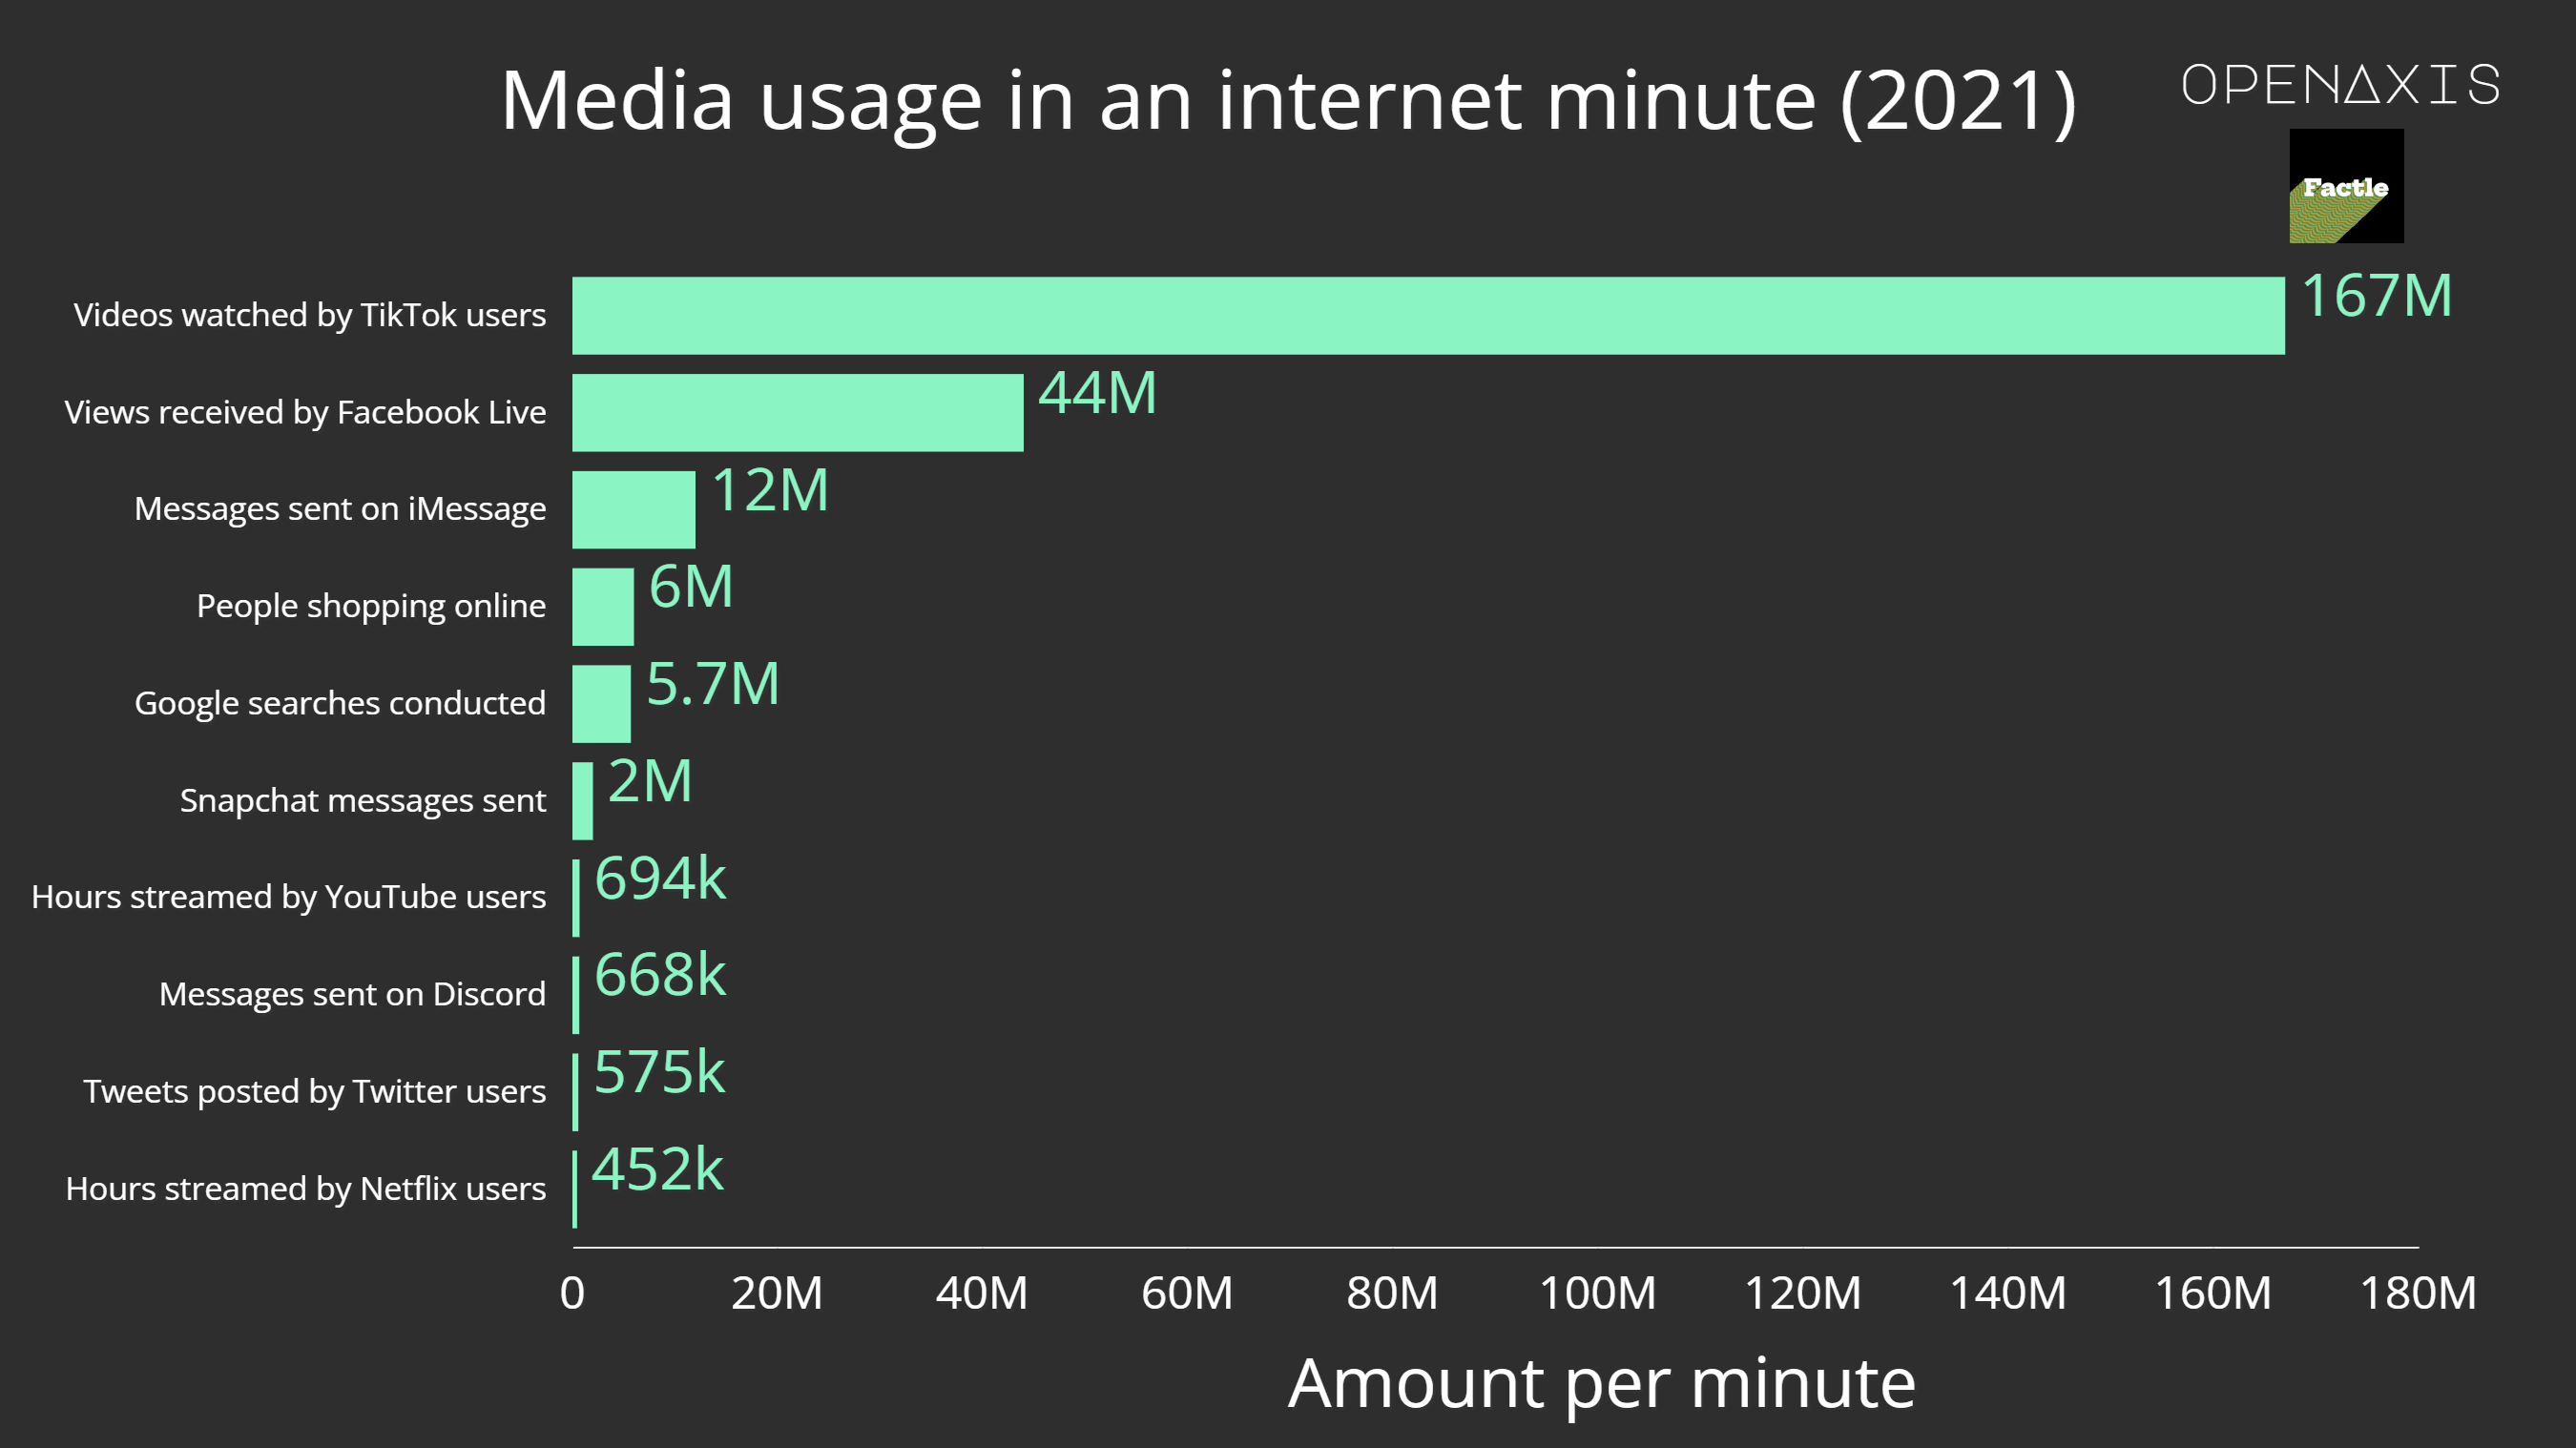 "Media usage in an internet minute (2021)"